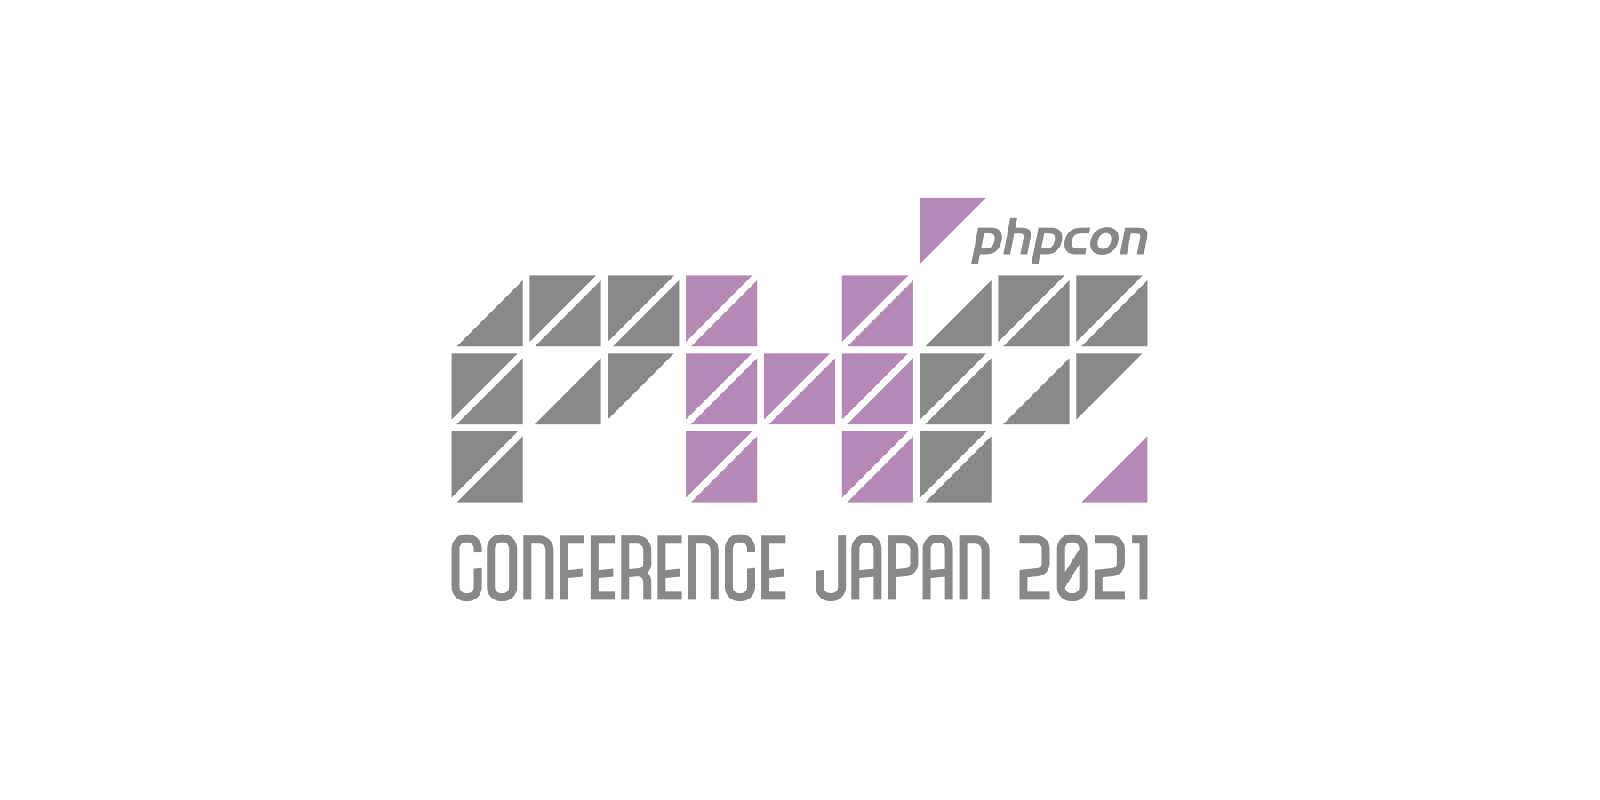 PHP Conference Japan 2021